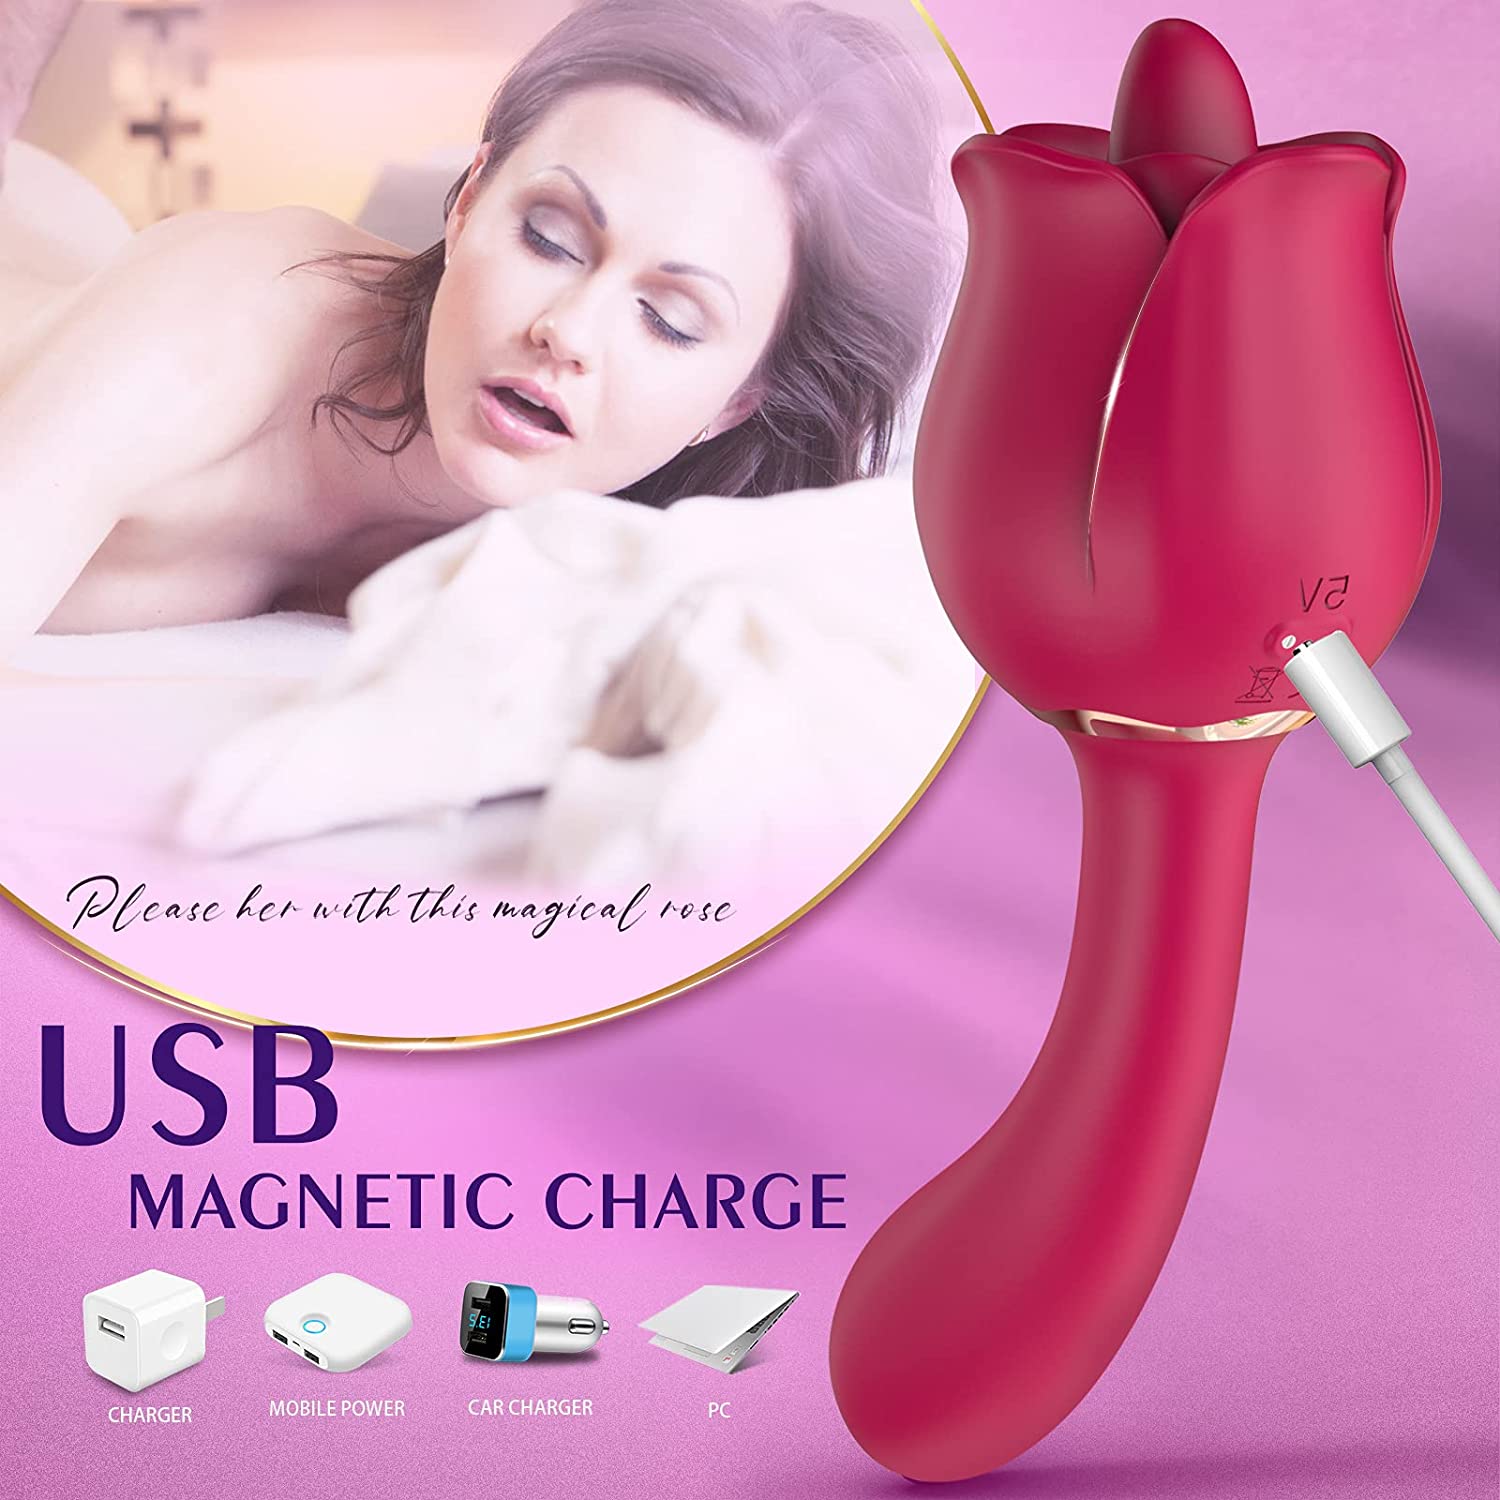 PHANXY 2 in 1 Clitoral Licking & Vibrating Sexual Rose